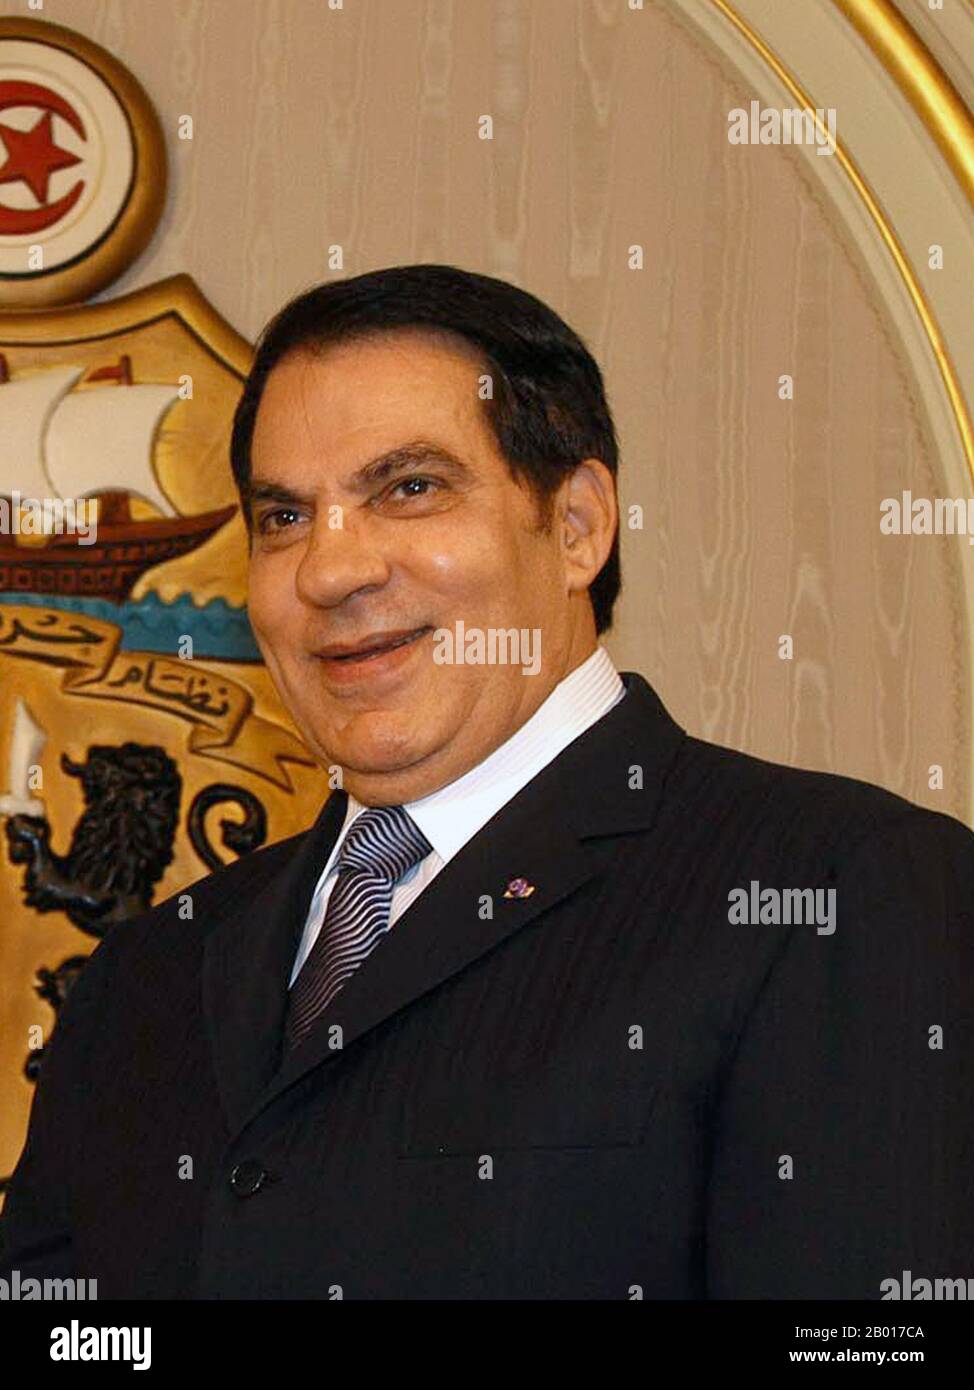 Tunisia: Zine El Abidine Ben Ali, President of Tunisia (r. 1987-2011), November 2008, Presidencia de la Nacion Argentina (CC BY-2.0 License).  Zine El Abidine Ben Ali (3 September 1936 - 19 September 2019) was the second President of the Tunisian Republic. He held the office from 7 November 1987, until he was forced to step down and flee the country on 14 January 2011. Ben Ali was appointed Prime Minister in October 1987, and assumed the Presidency in November 1987 in a bloodless coup d'état from then President Habib Bourguiba. Stock Photo